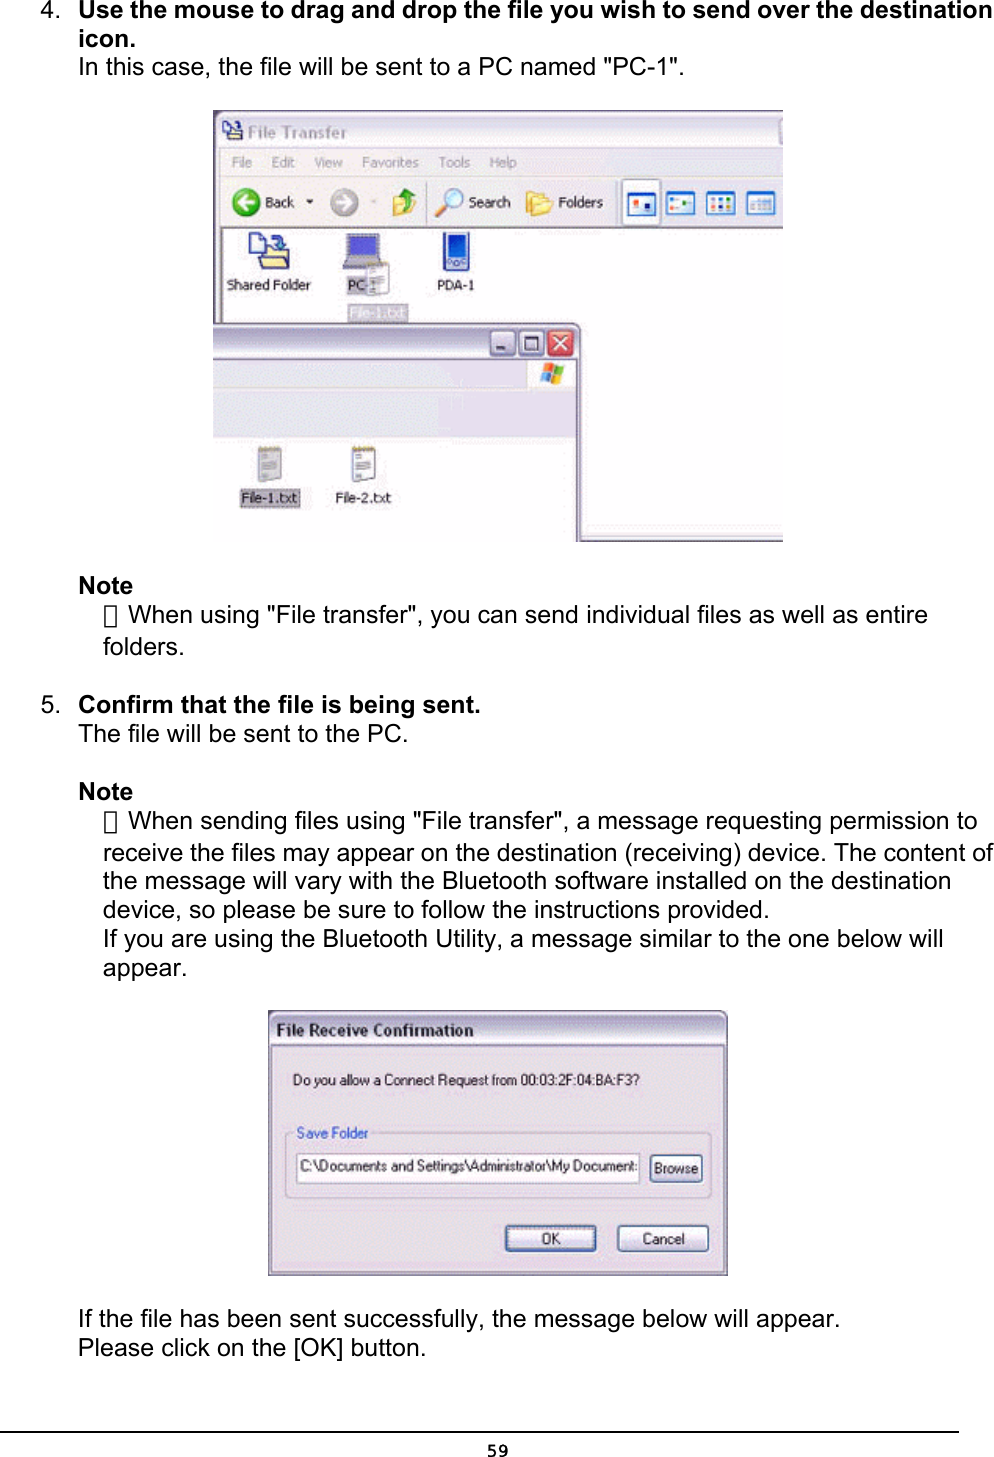  4.  Use the mouse to drag and drop the file you wish to send over the destination icon. In this case, the file will be sent to a PC named &quot;PC-1&quot;.  Note ．When using &quot;File transfer&quot;, you can send individual files as well as entire folders. 5.  Confirm that the file is being sent. The file will be sent to the PC. Note ．When sending files using &quot;File transfer&quot;, a message requesting permission to receive the files may appear on the destination (receiving) device. The content of the message will vary with the Bluetooth software installed on the destination device, so please be sure to follow the instructions provided. If you are using the Bluetooth Utility, a message similar to the one below will appear.  If the file has been sent successfully, the message below will appear. Please click on the [OK] button.  59